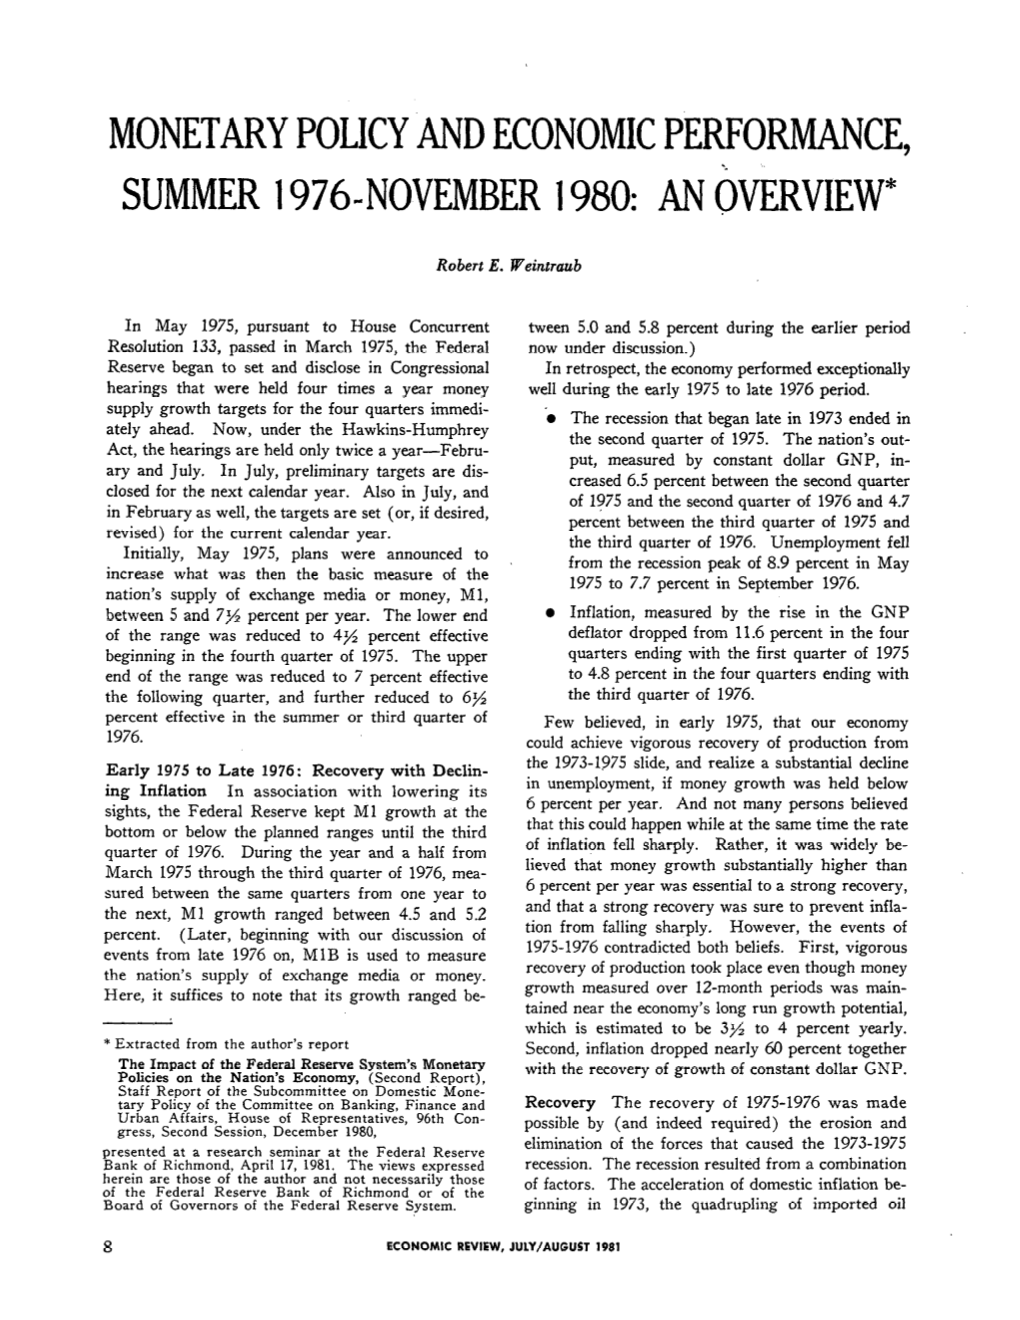 Monetary Policy and Economic Performance, Summer 1976